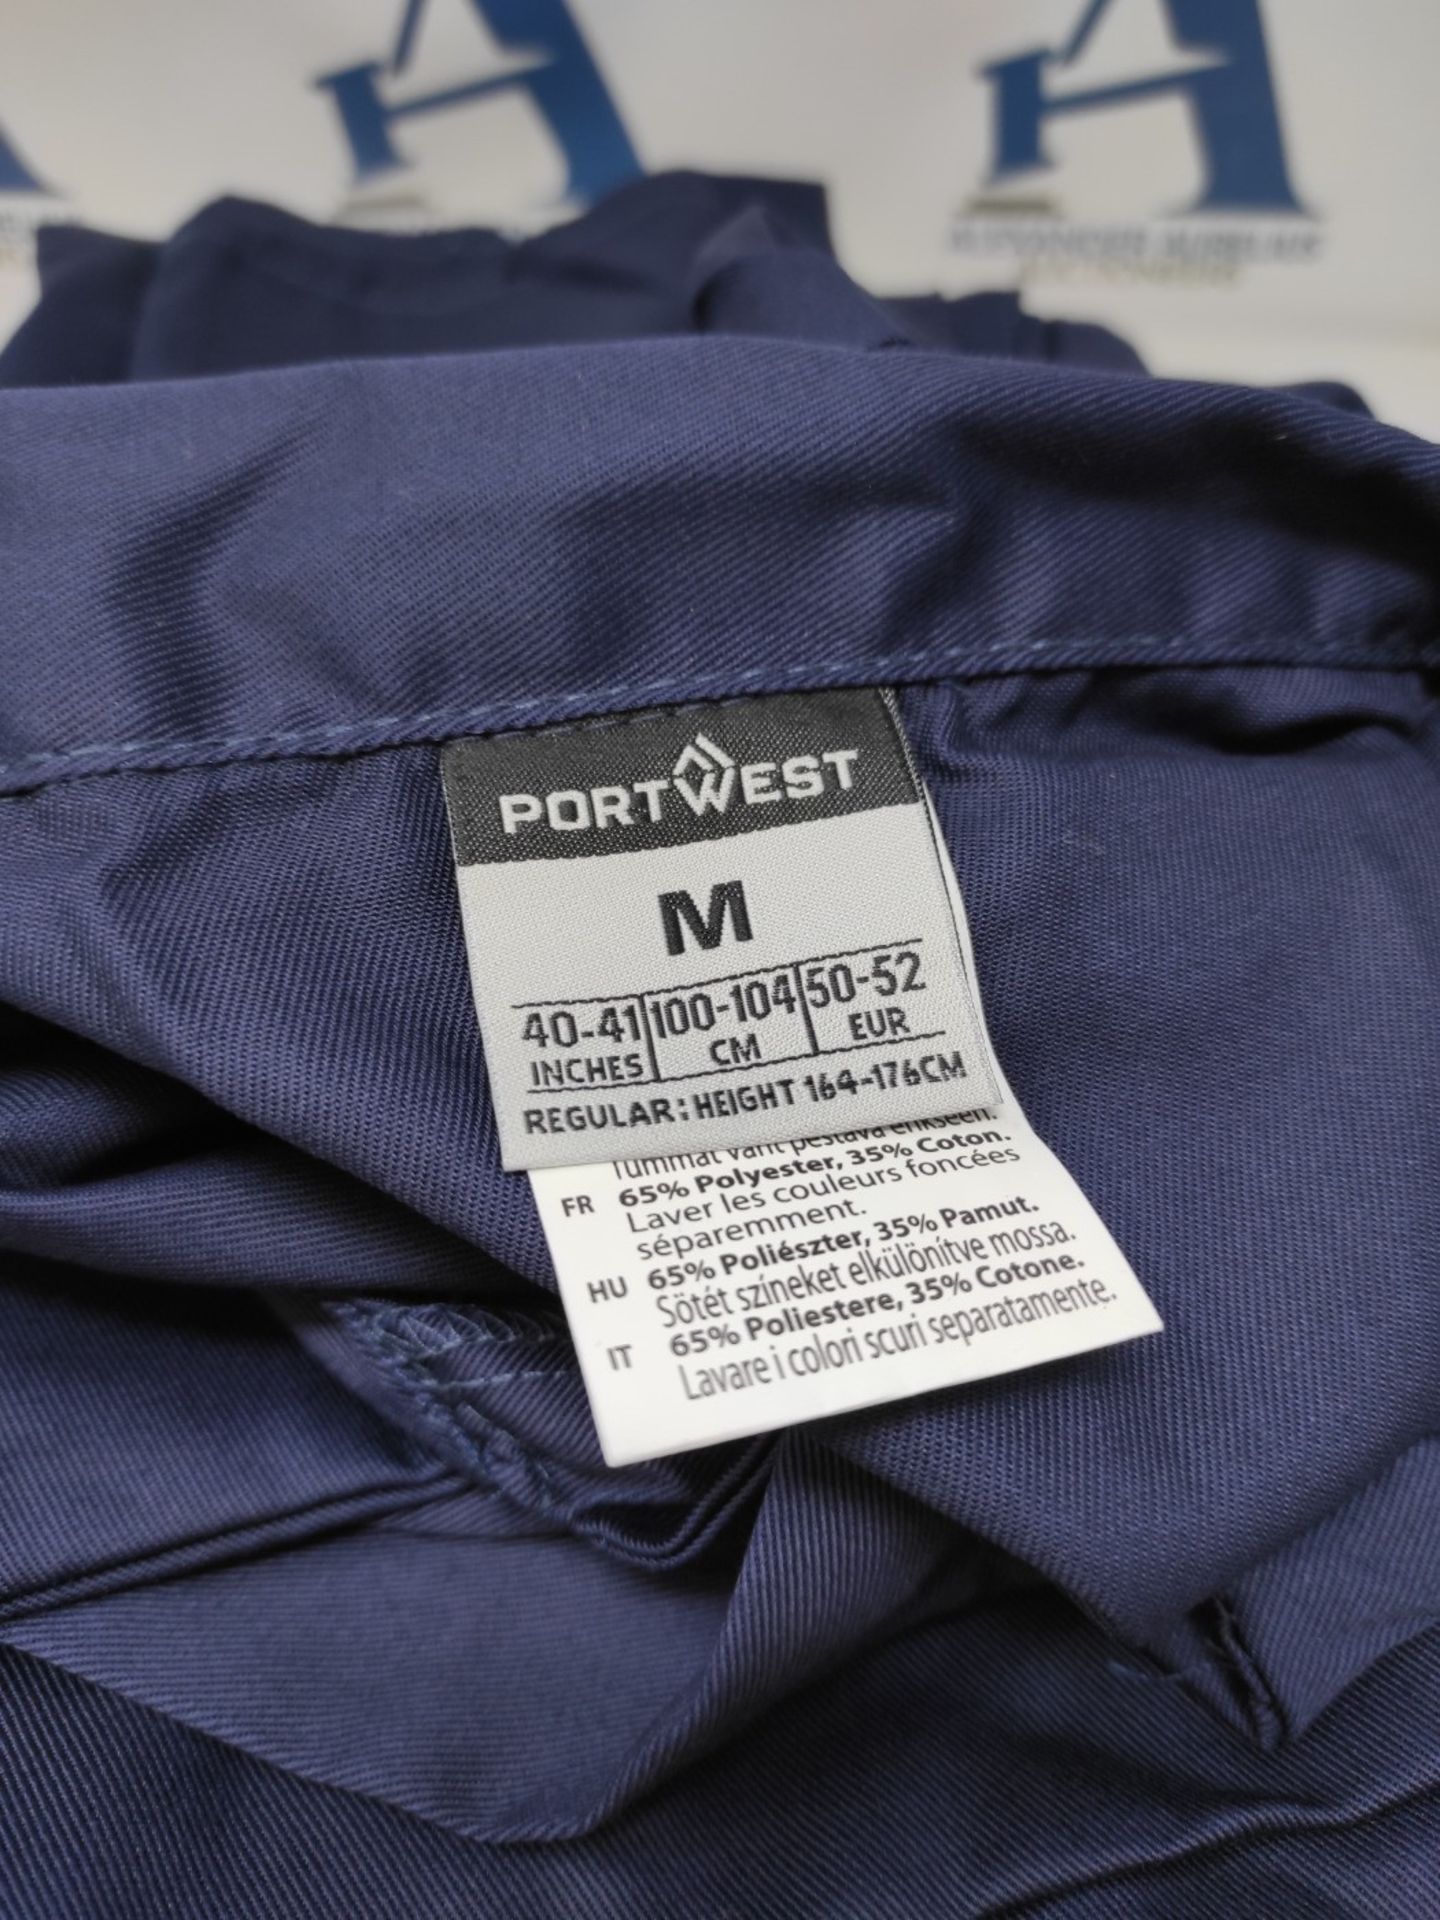 Portwest S999 Men's Euro Workwear Polycotton Coverall Boiler Suit Overalls Navy, M - Image 3 of 3